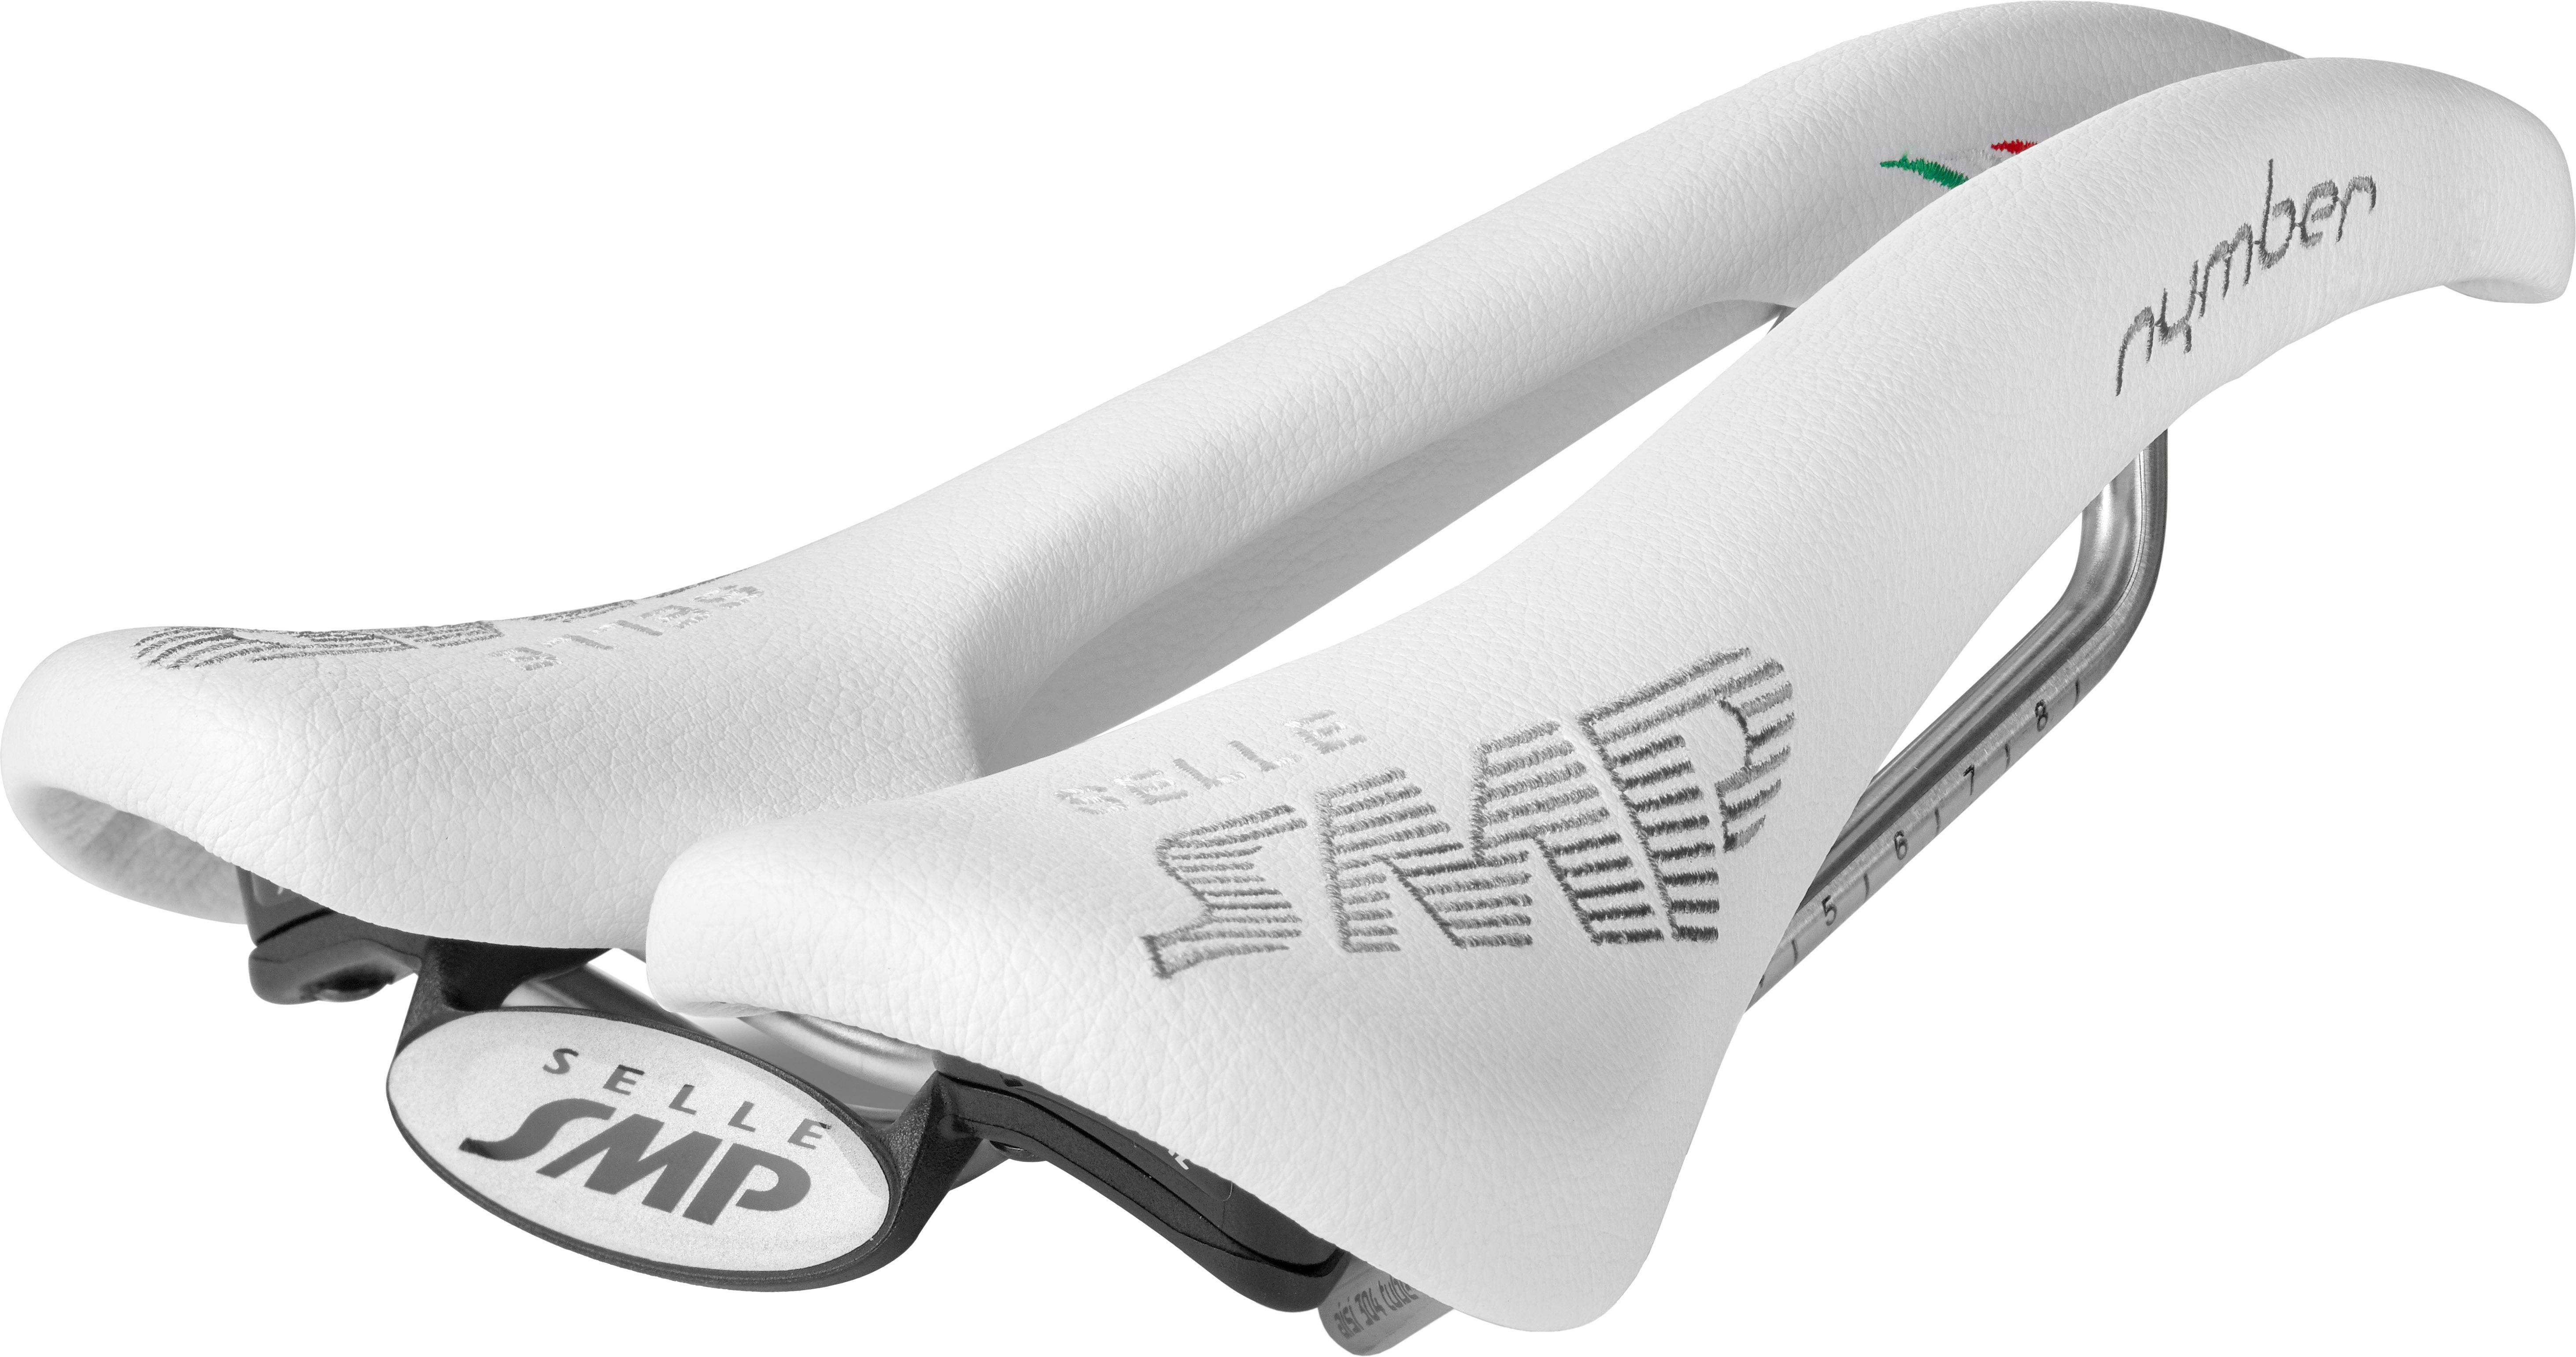 Selle Smp Nymber Saddle - White